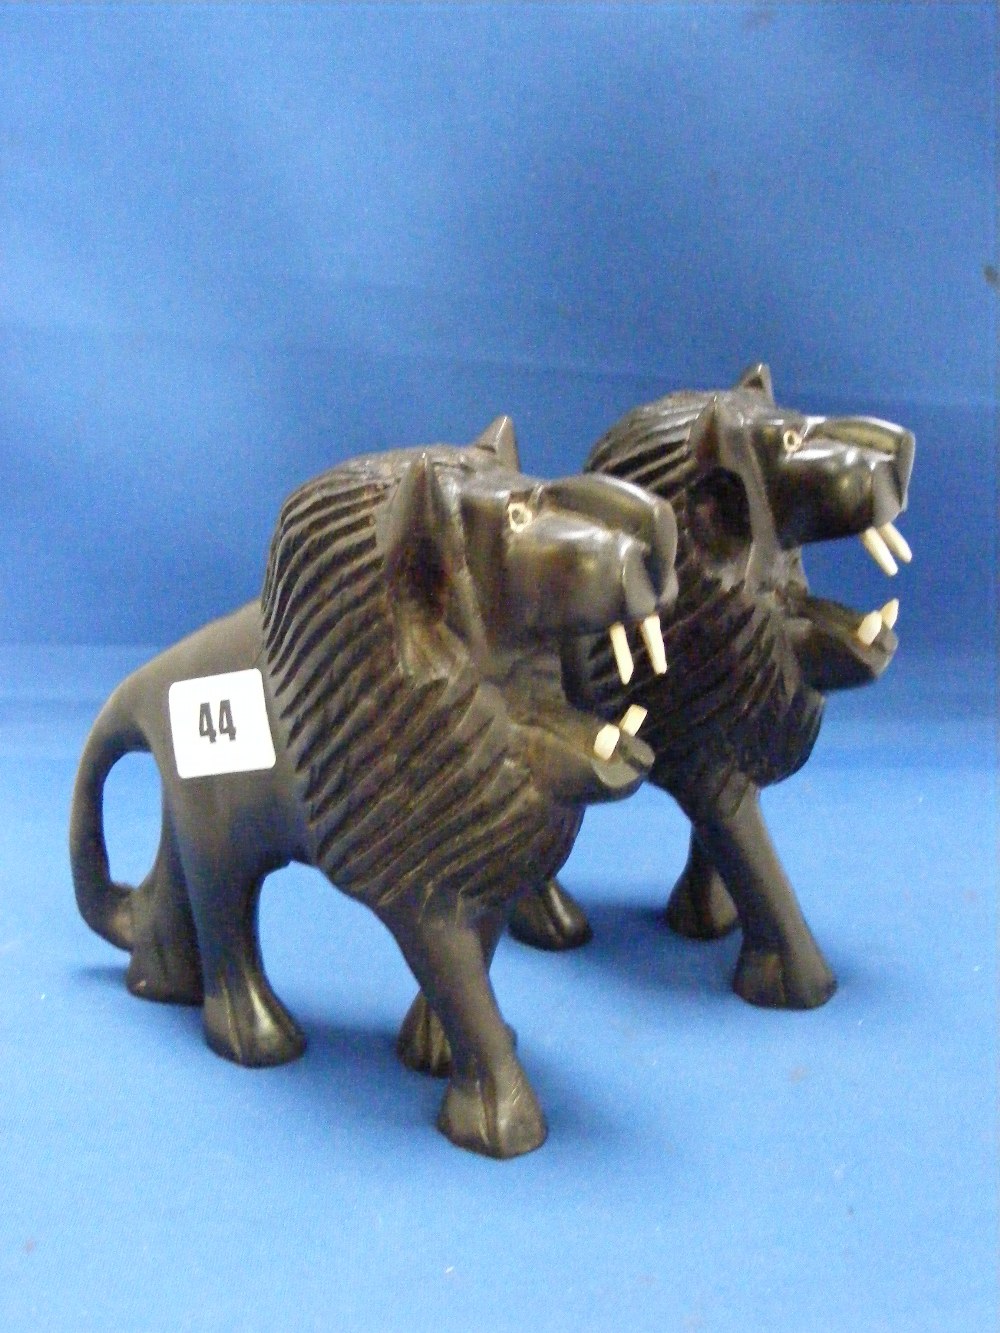 A pair of ebony carved figures of lions with ivory teeth and eyes.